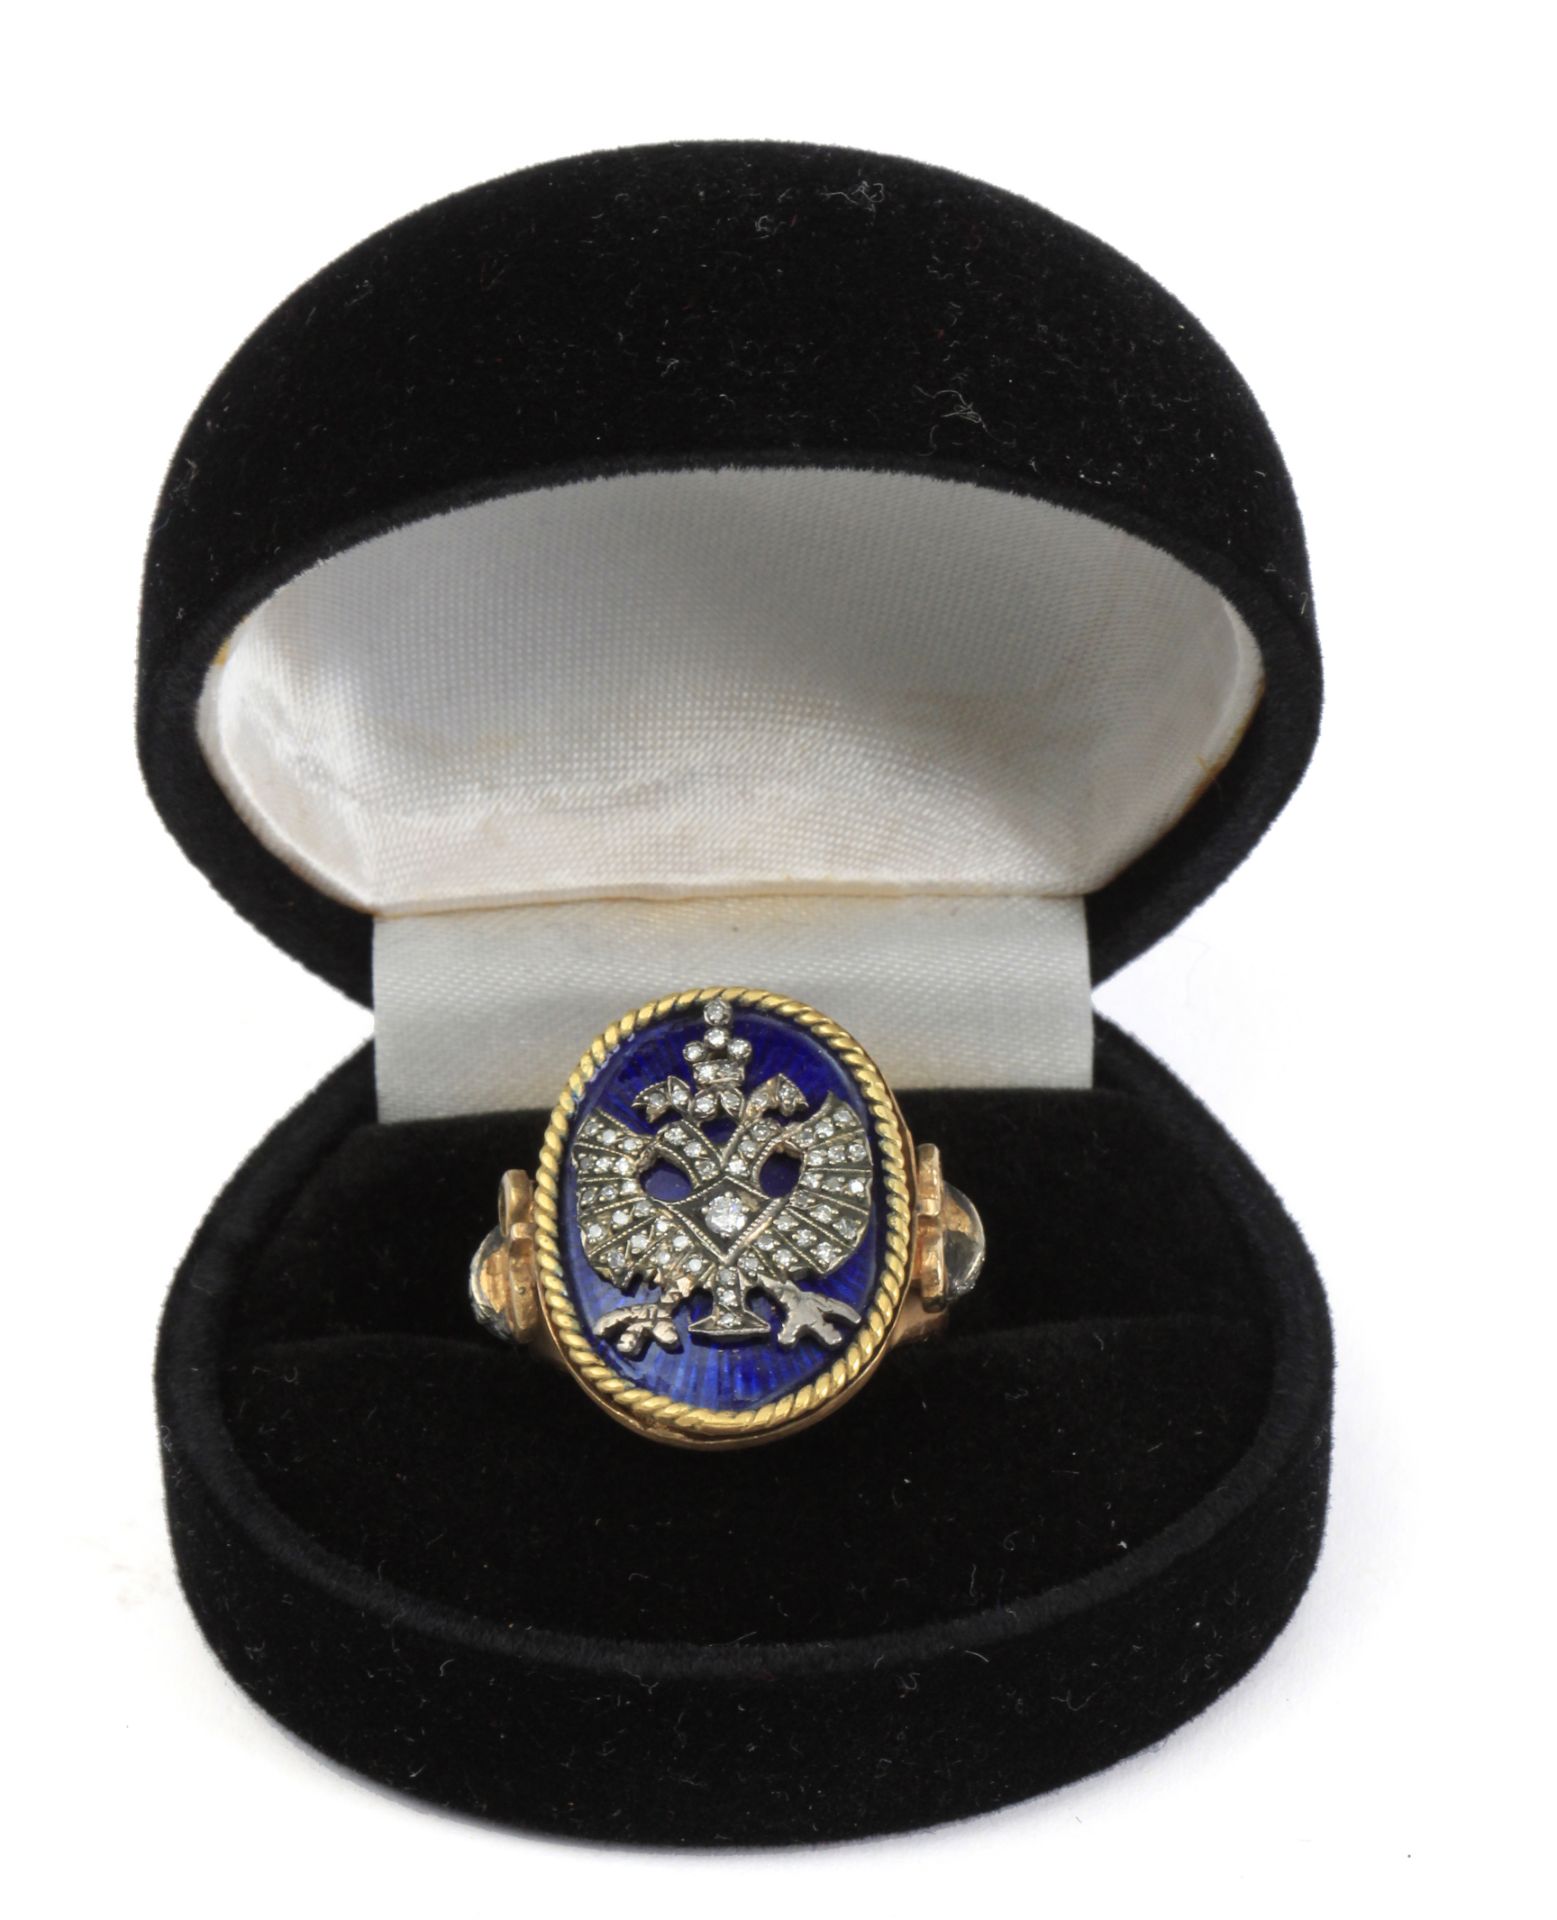 A 19th century Russian signet ring - Image 3 of 4